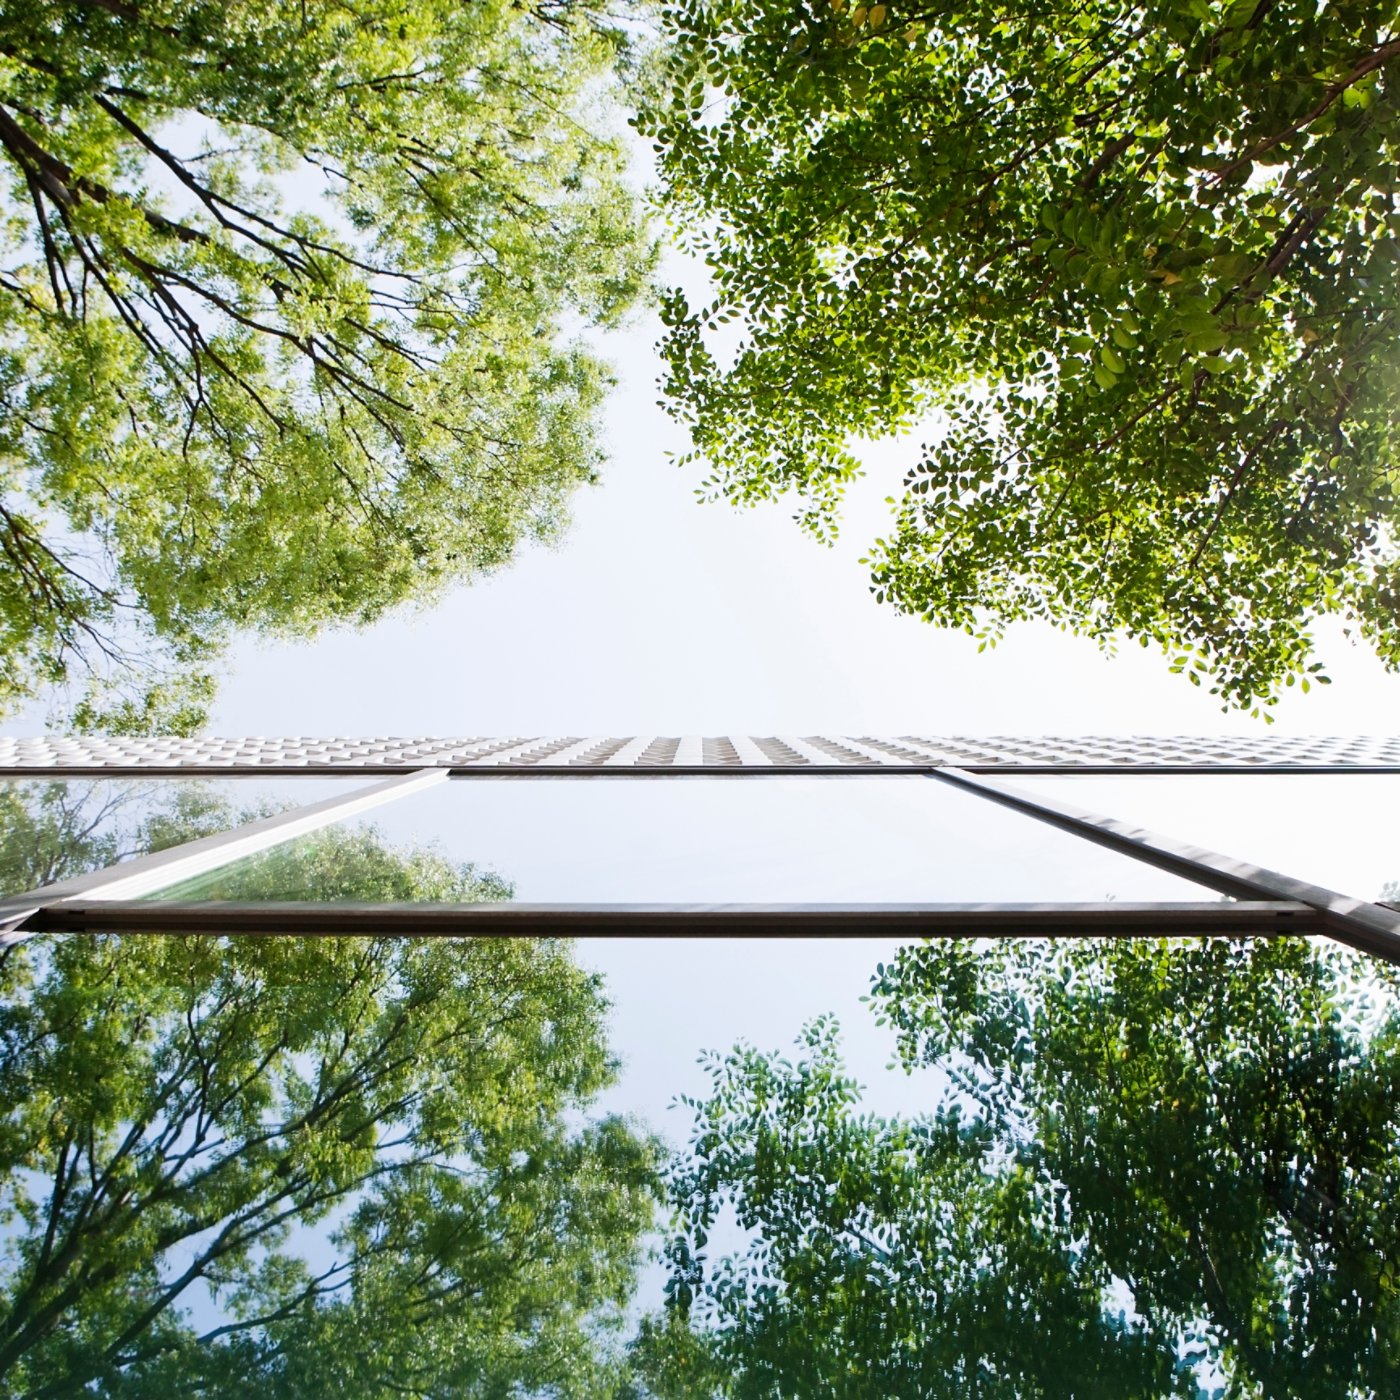 Glass-walled building reflecting trees. This is shoot with a composition to look up from a lower place.